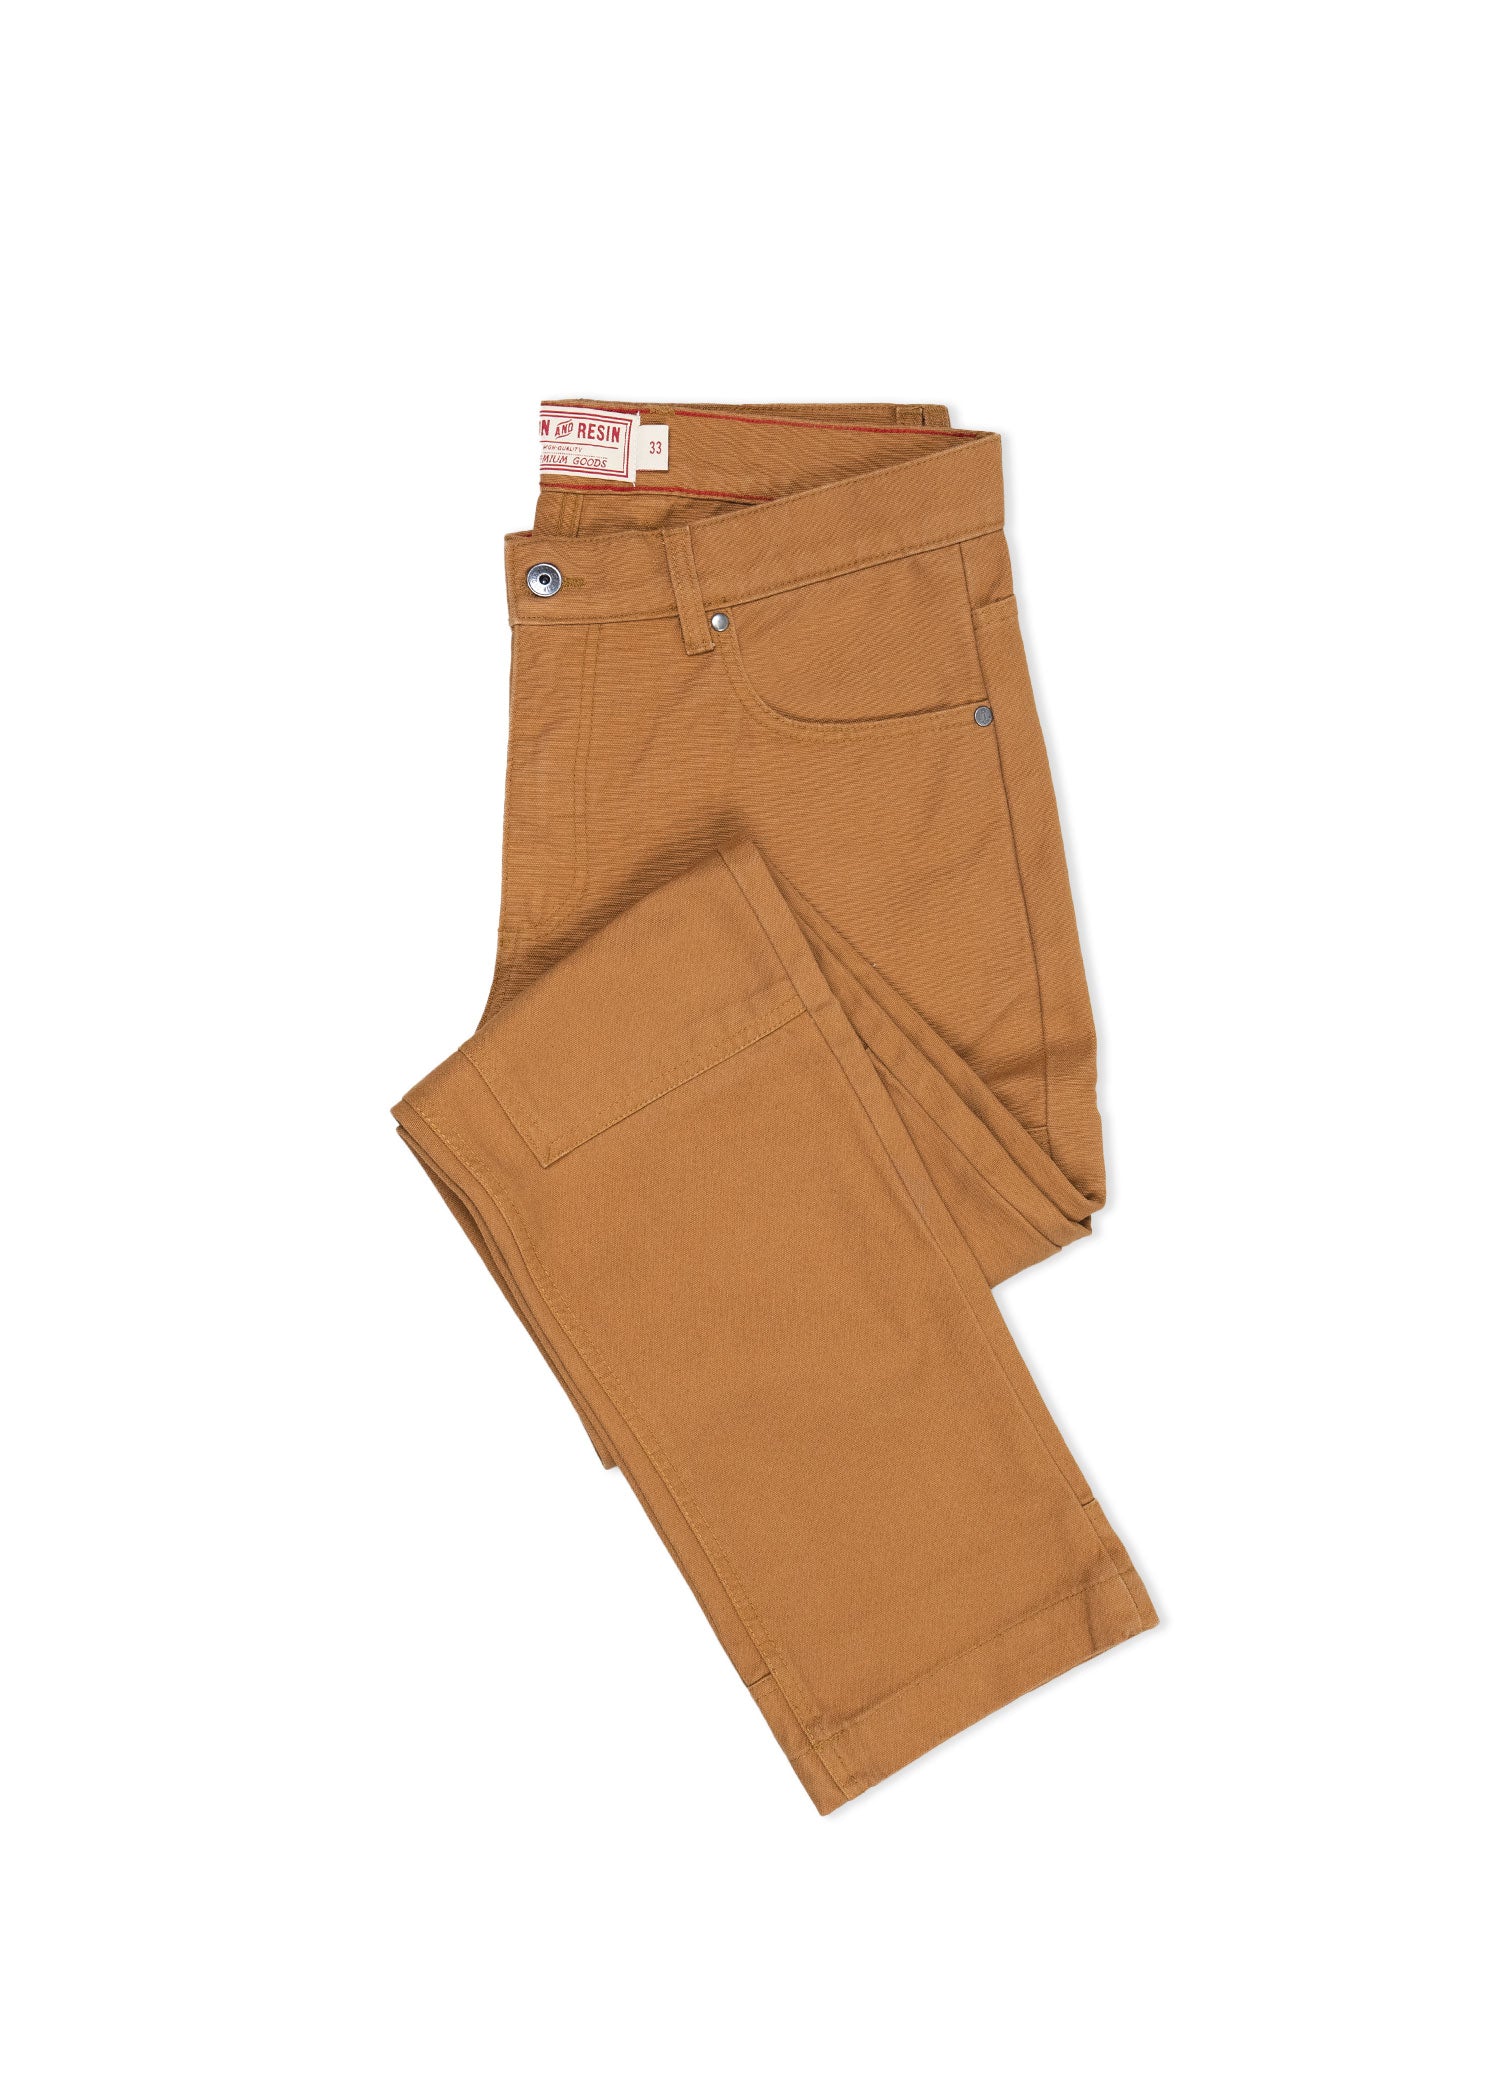 6214 Work Trouser Canvas RuffWork  BrownBlack 1204  Snickers